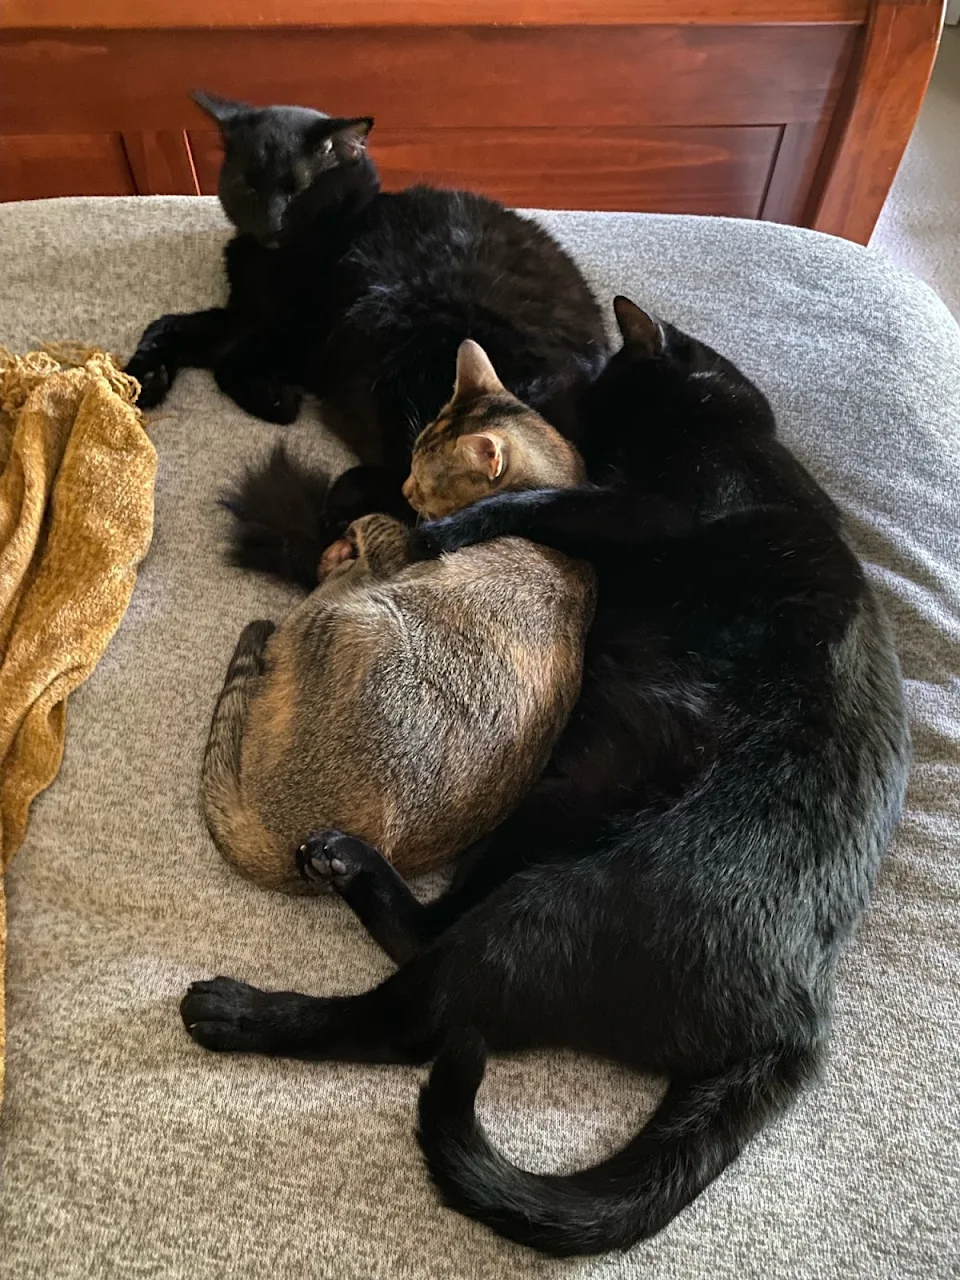 No matter how good or bad your day’s been, please enjoy cats spooning before carrying on [OC]